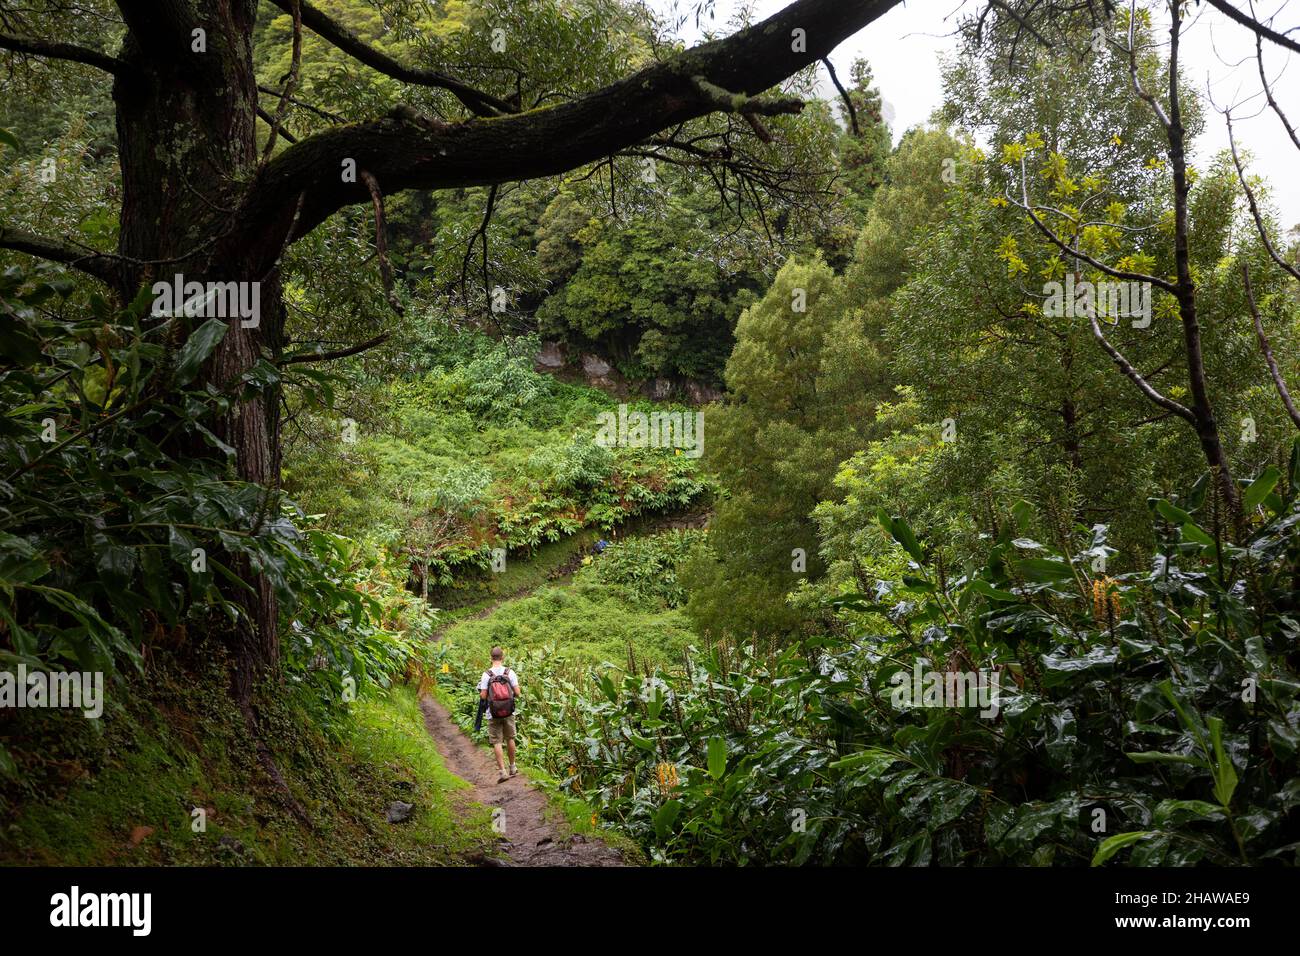 Hikers on the way to the Salto do Prego waterfall past the large-leaved perennials of the butterfly ginger, Faial da Terra, Sao Miguel Island Stock Photo